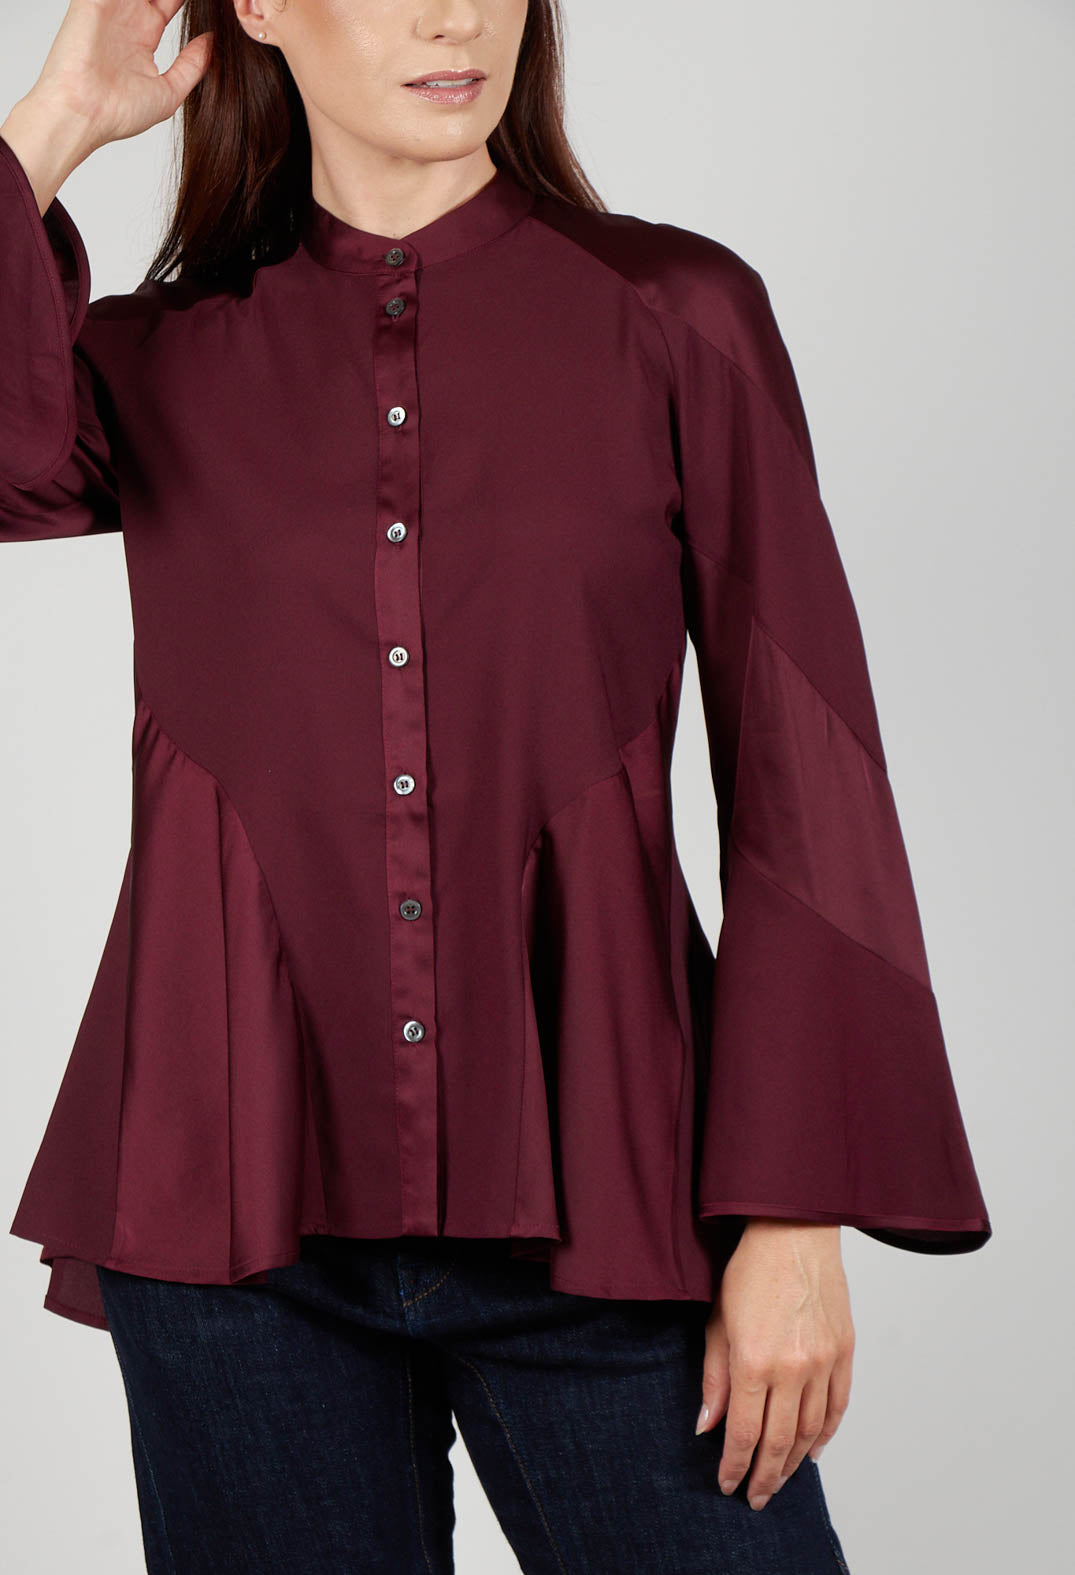 Patiently Shirt in Burgundy